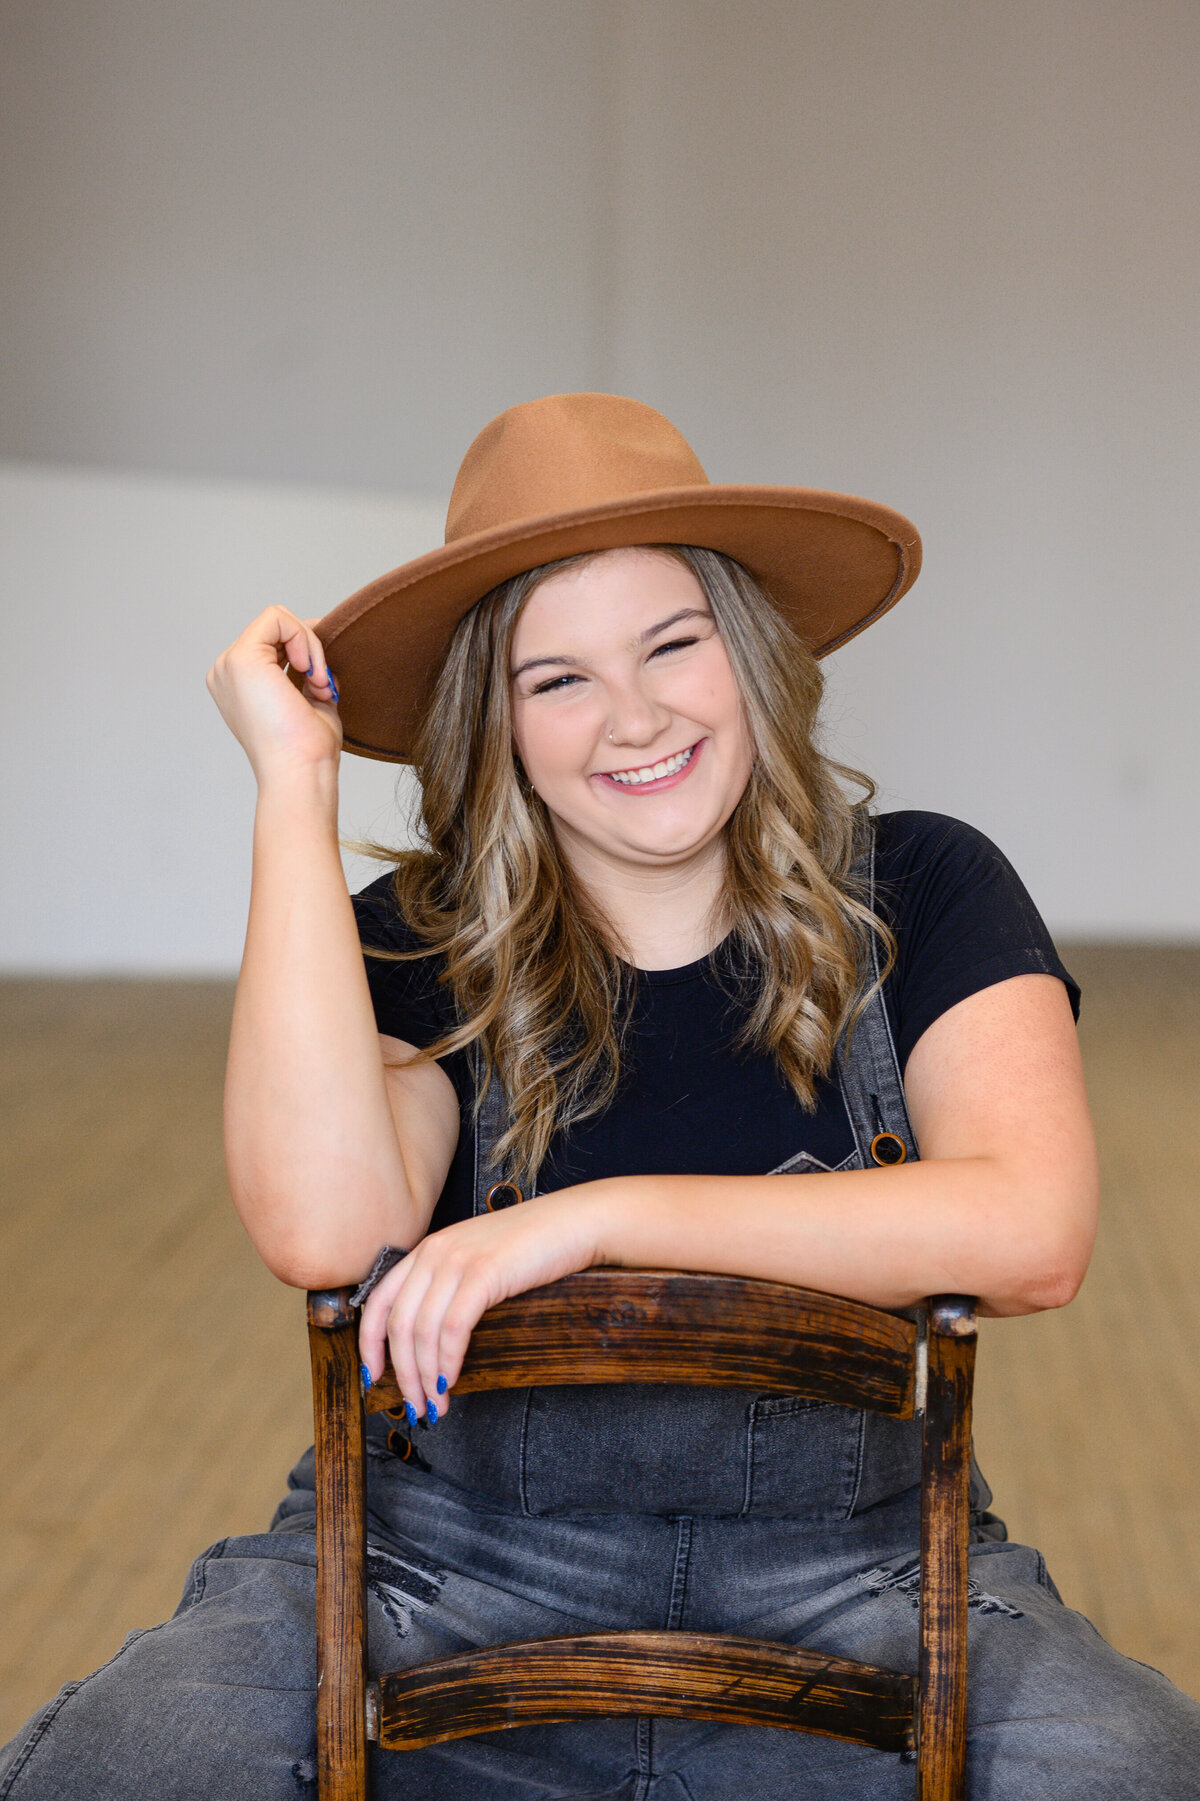 Senior photo outfit idea of a girl in black overalls sitting backward in a wooden chair with a brown hat